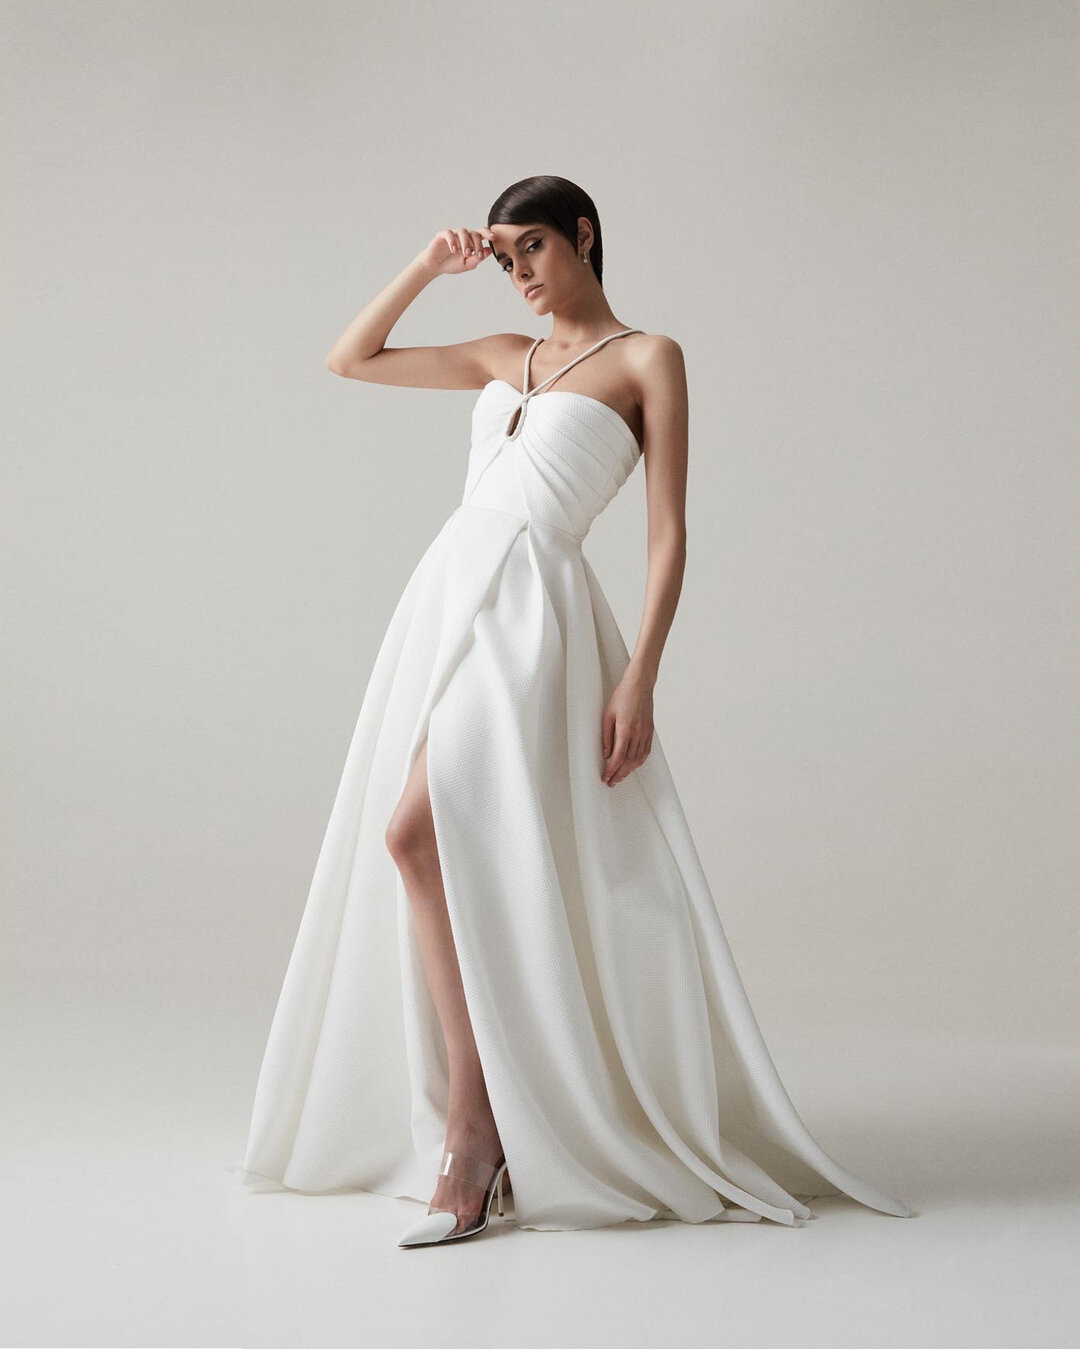 Defined through structured drapes, glamorous accessories and geometric lines, 'Elleni' is a show-stopper💫 ⠀⠀⠀⠀⠀⠀⠀⠀⠀
⠀⠀⠀⠀⠀⠀⠀⠀⠀
#silk #minimalisticshoot #minimalisticstyle #2024collection #moderncollection #lookbook #newdesigns #newdresses #realbrides